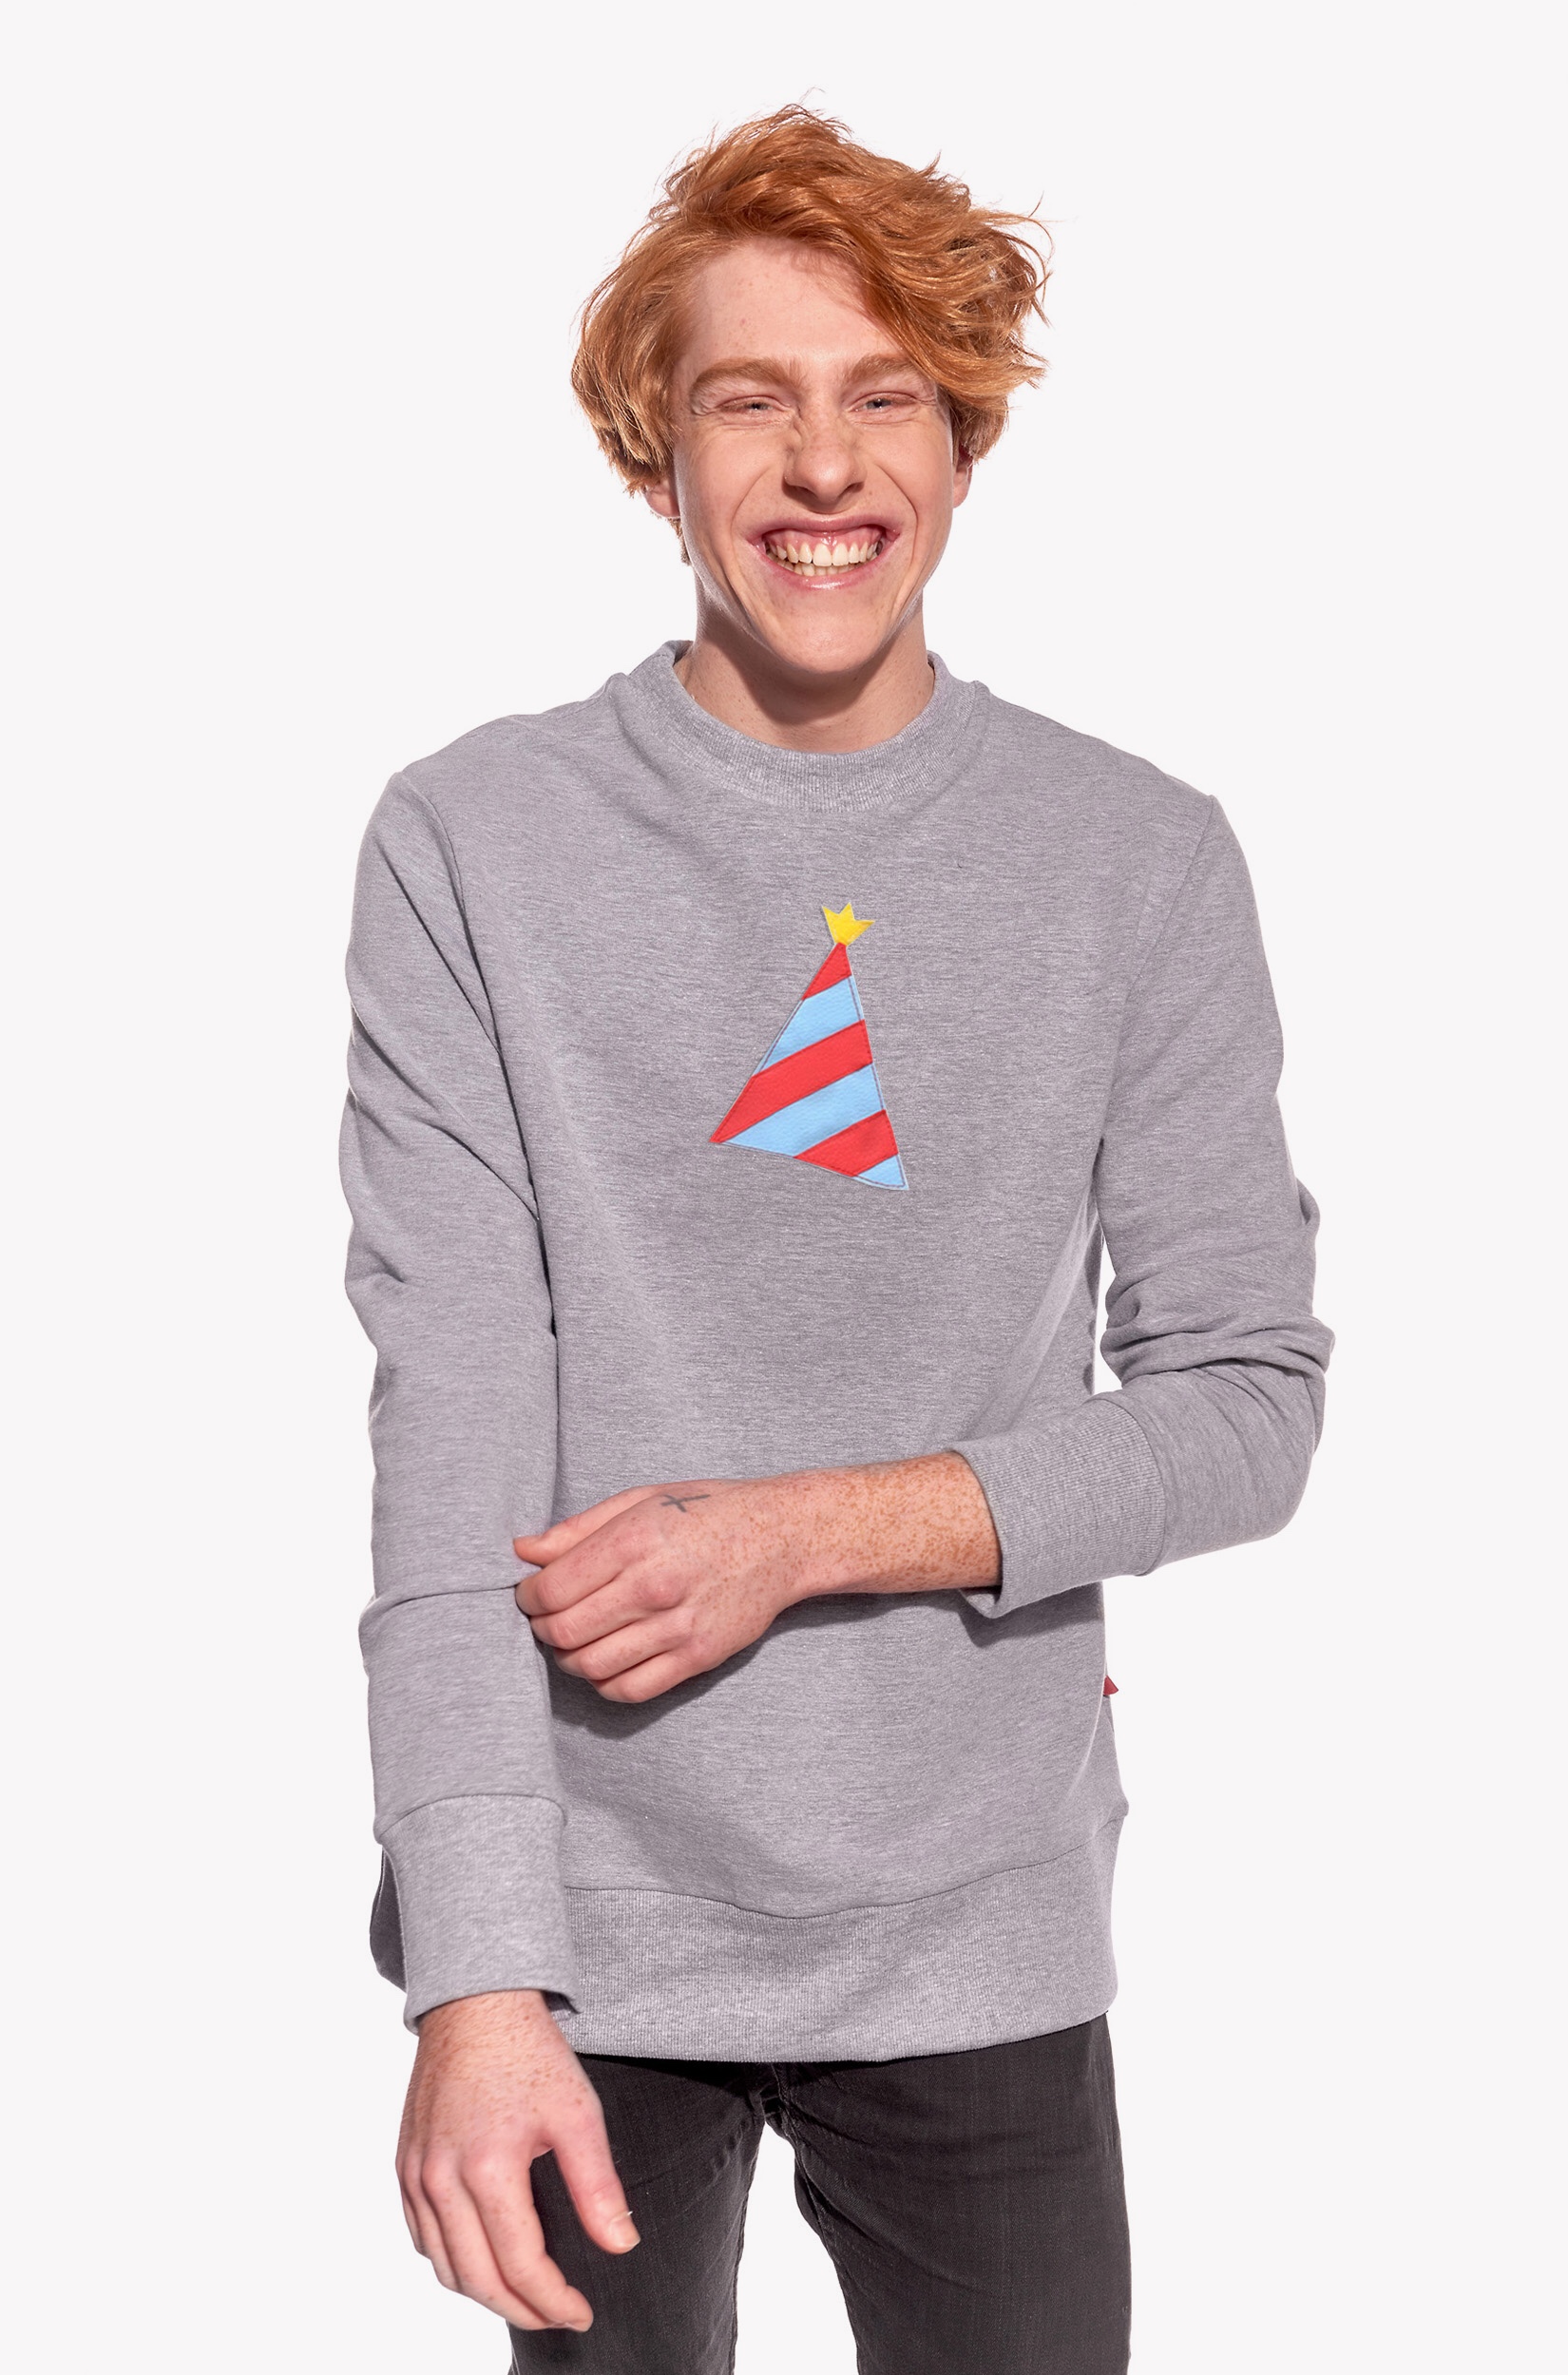 Hoodie with party hat